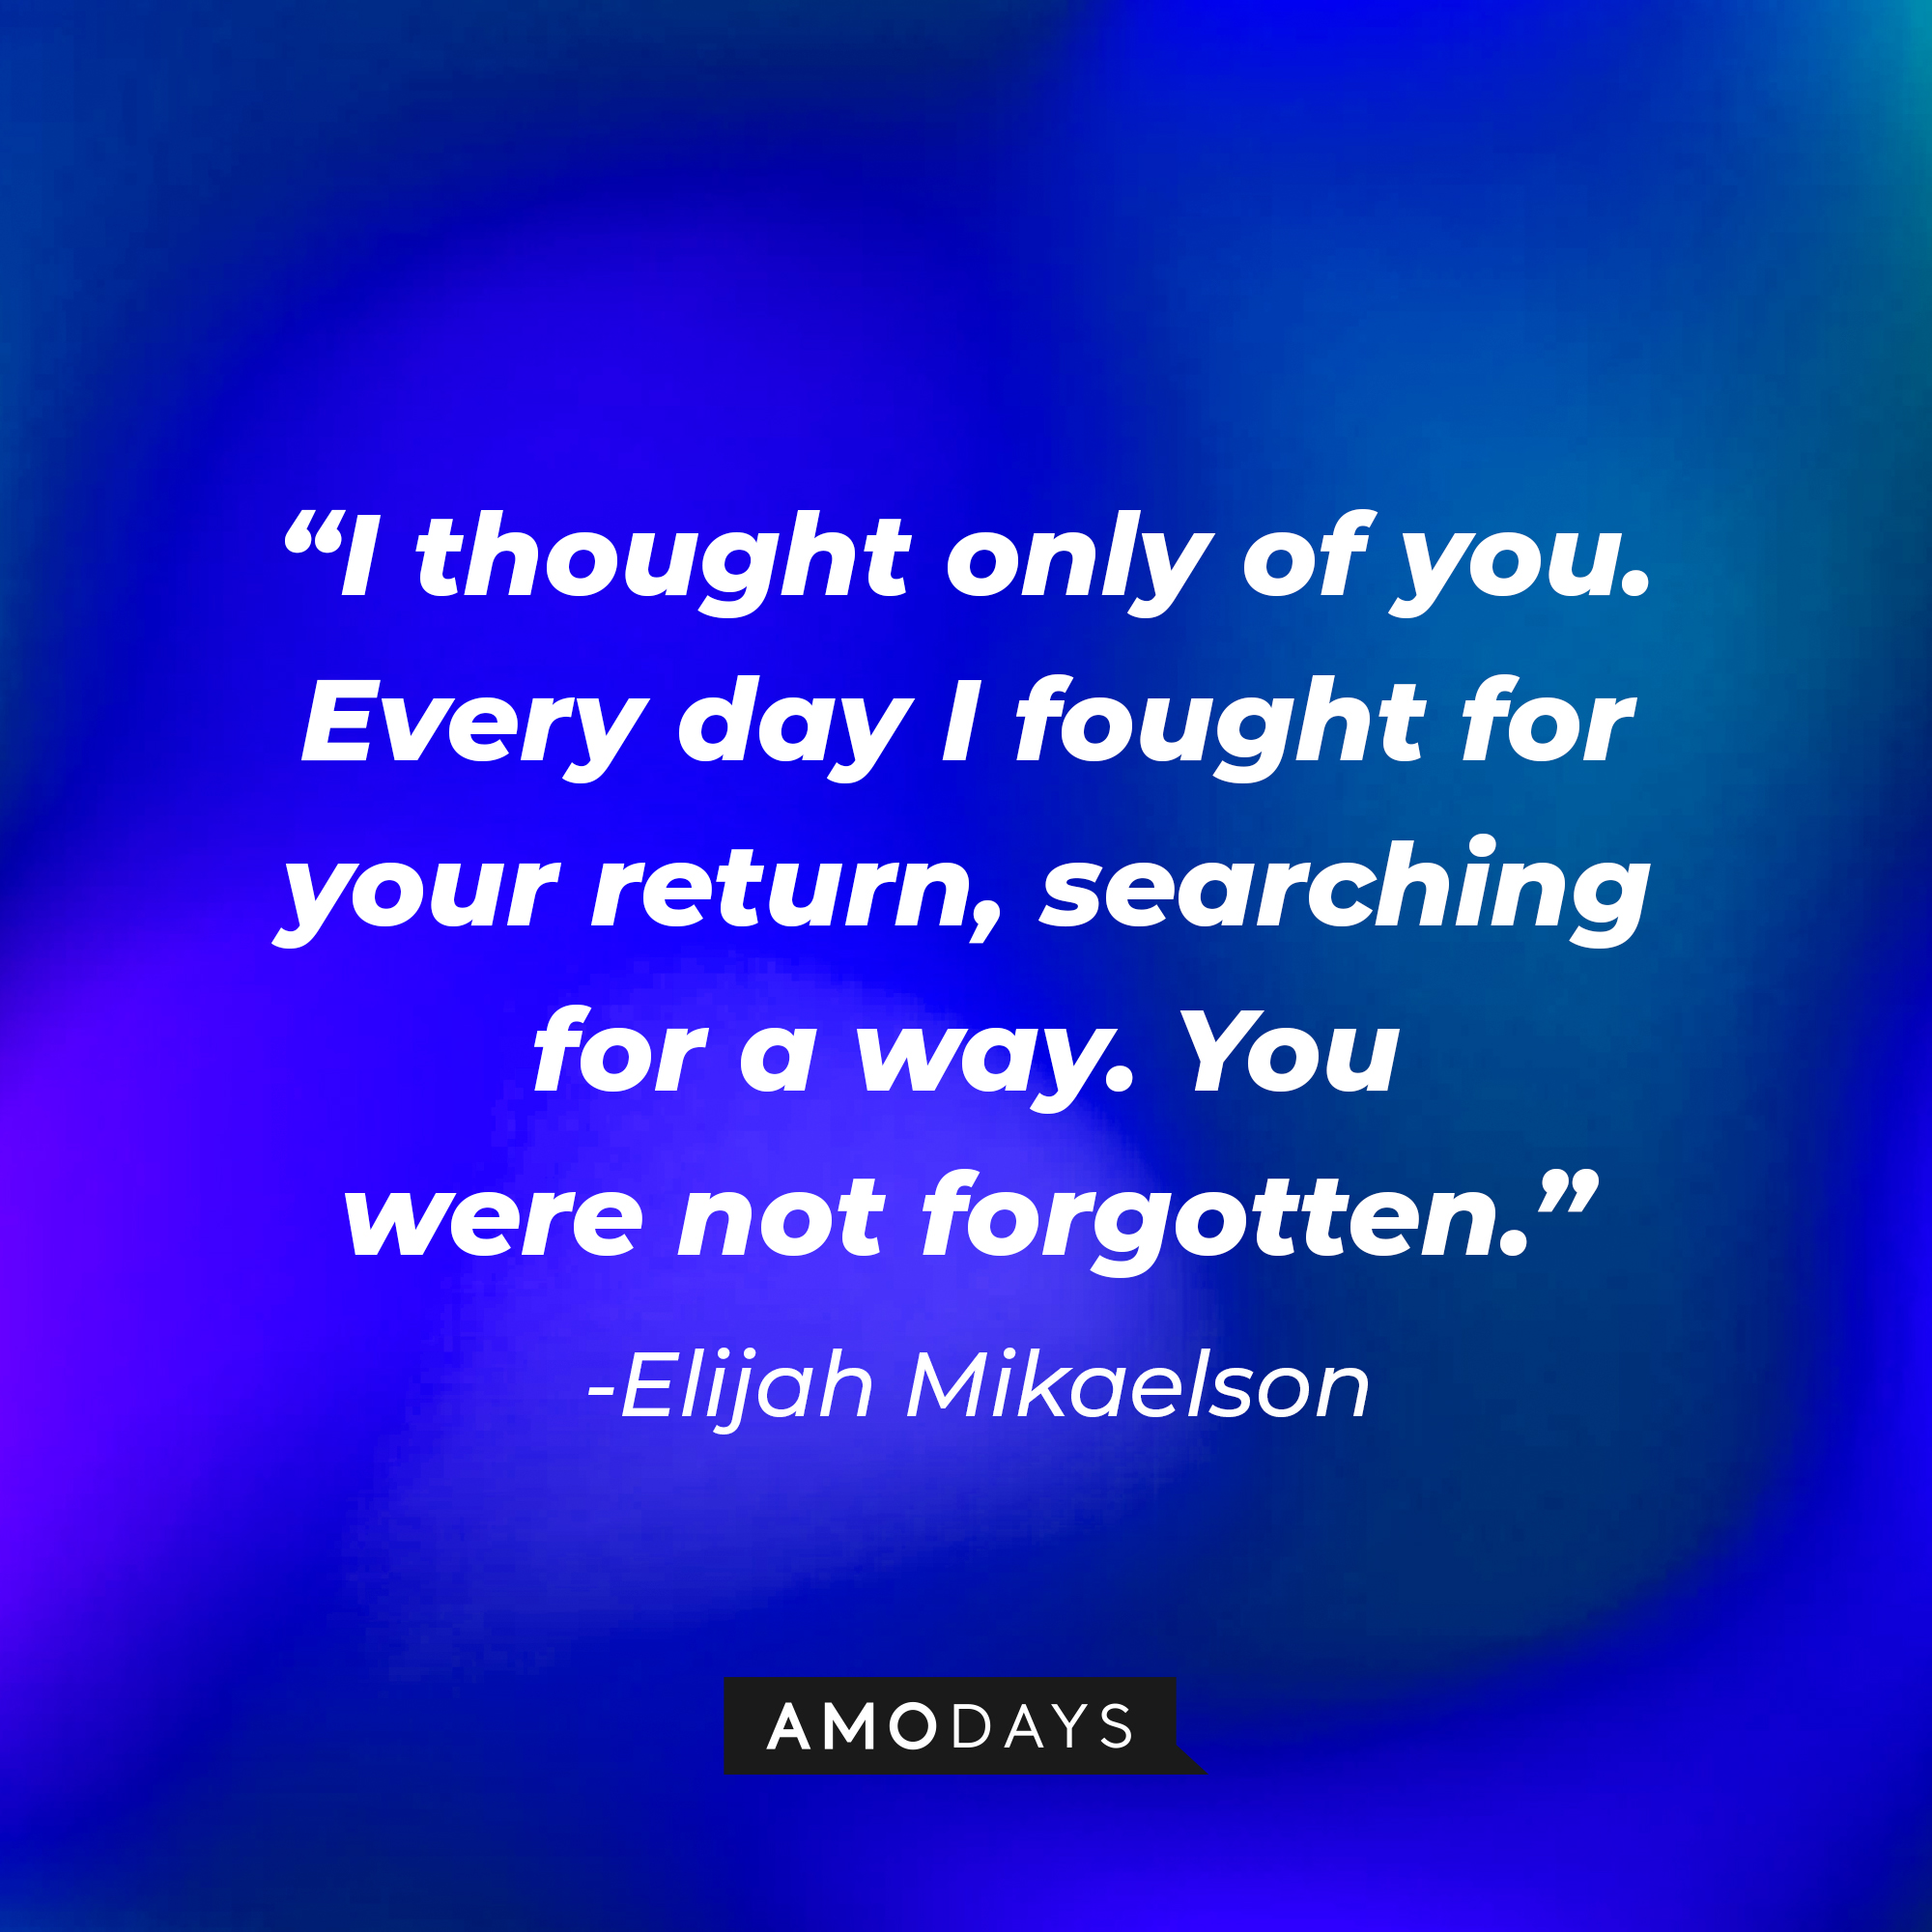 Elijah Mikaelson's quote: "I thought only of you. Every day I fought for your return, searching for a way. You were not forgotten." | Source: facebook.com/thevampirediaries